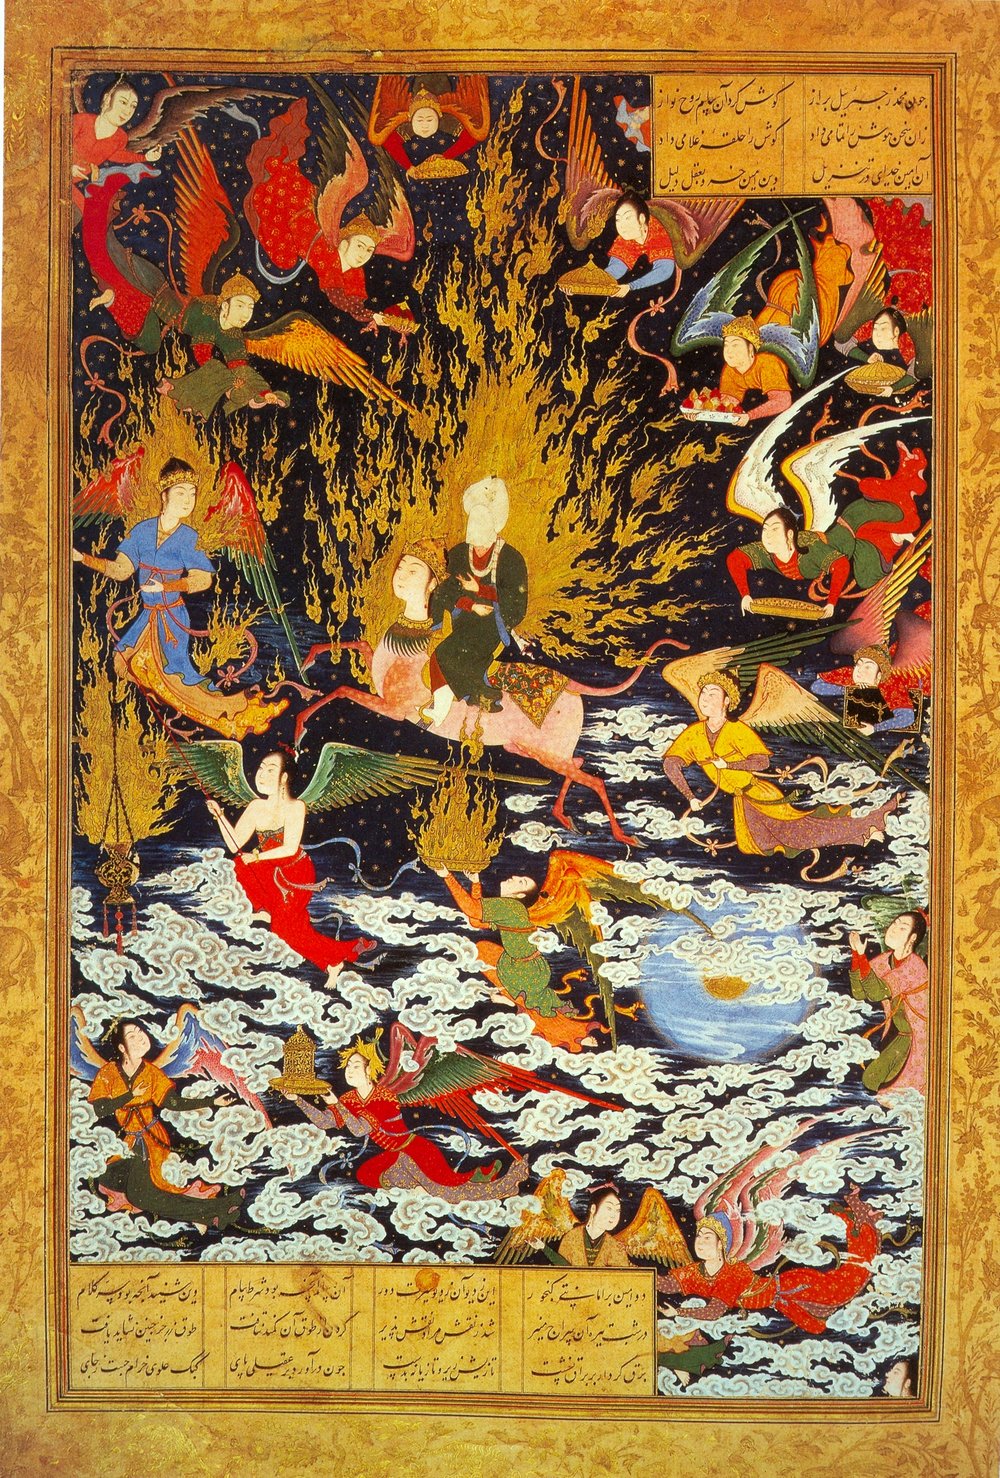 Sultan Muhammad    “The Ascent of Muhammad to Heaven”   c. 1539-43 opaque watercolor and ink on paper